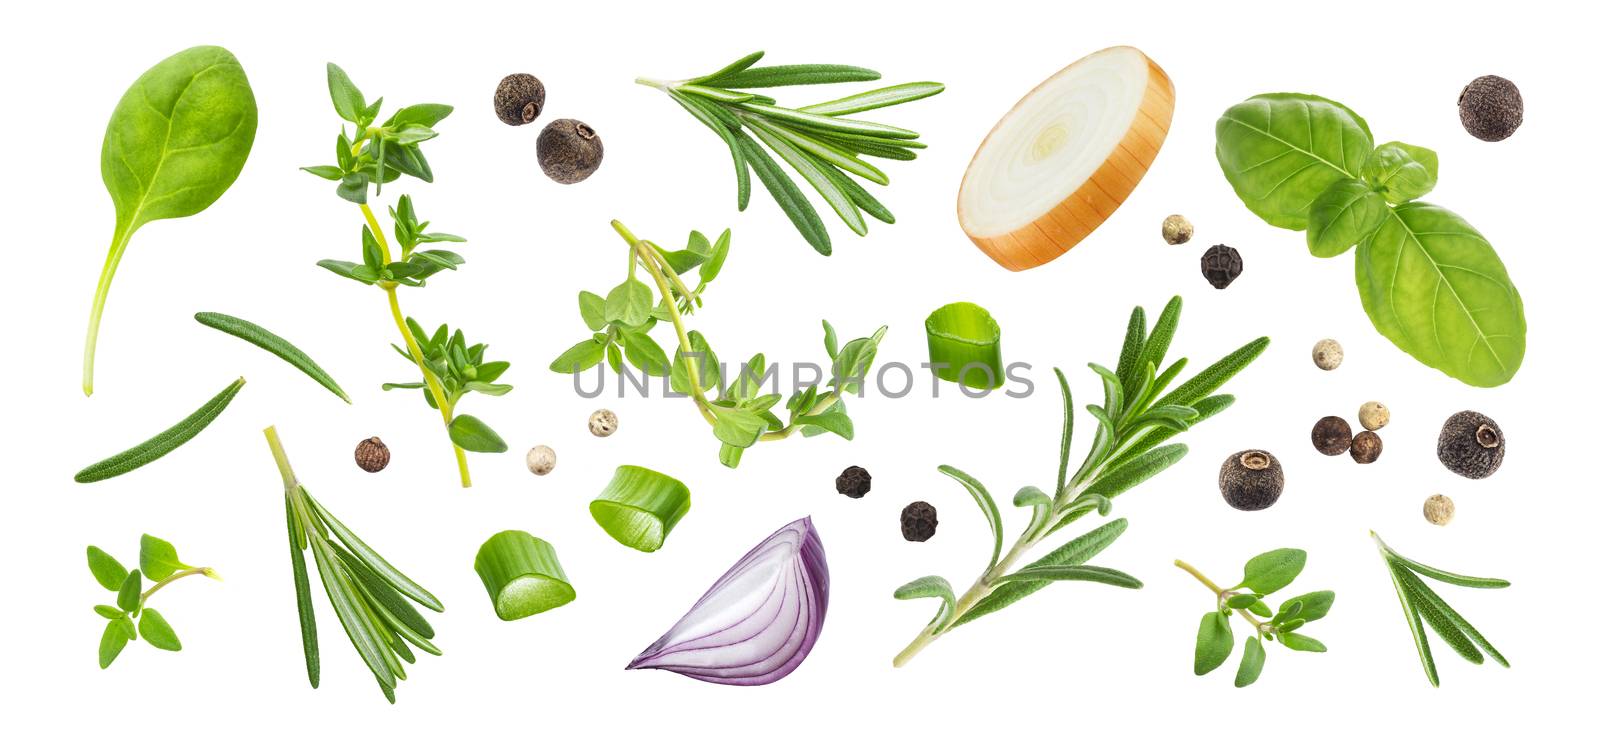 Different spices and herbs isolated on white background, top view by xamtiw